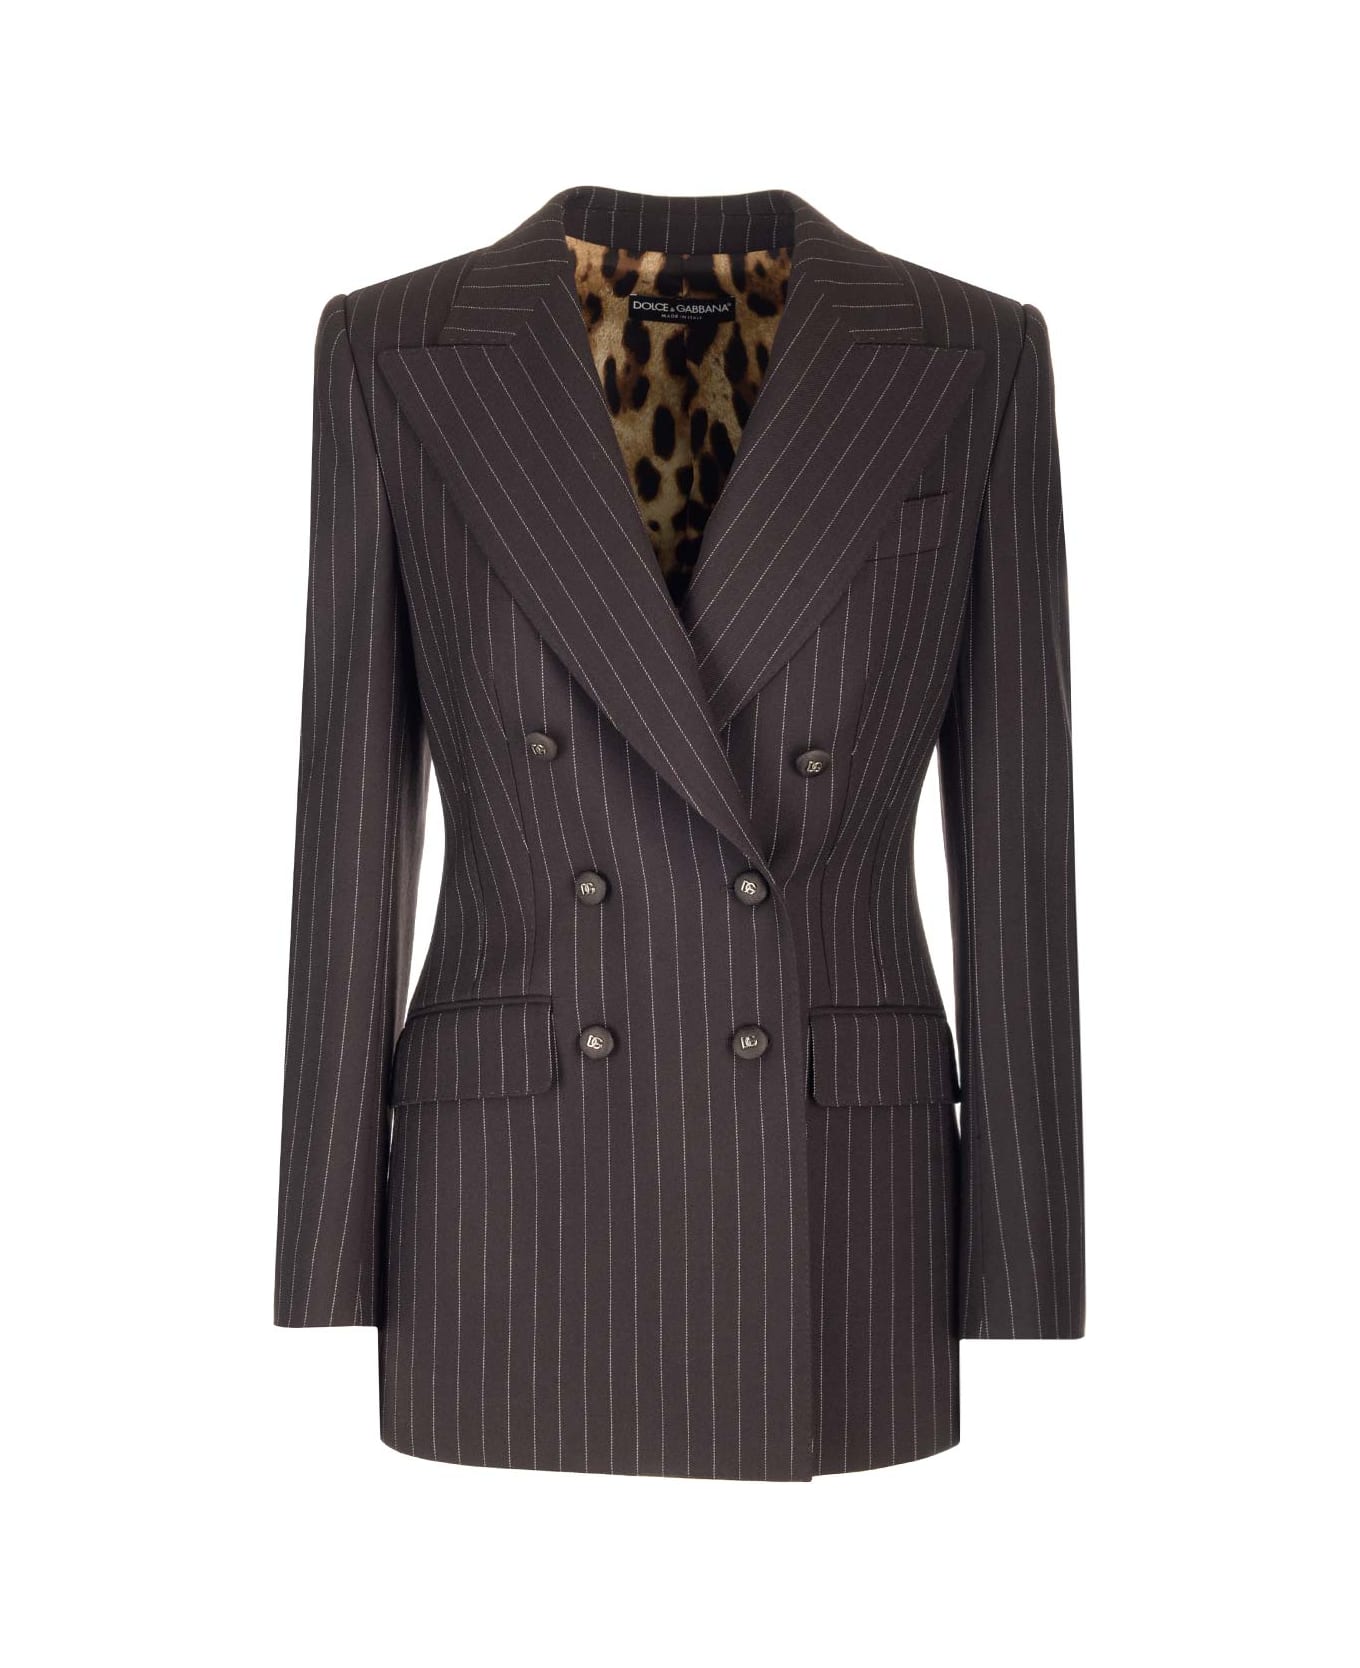 Dolce & Gabbana Double-breasted Blazer - BROWN